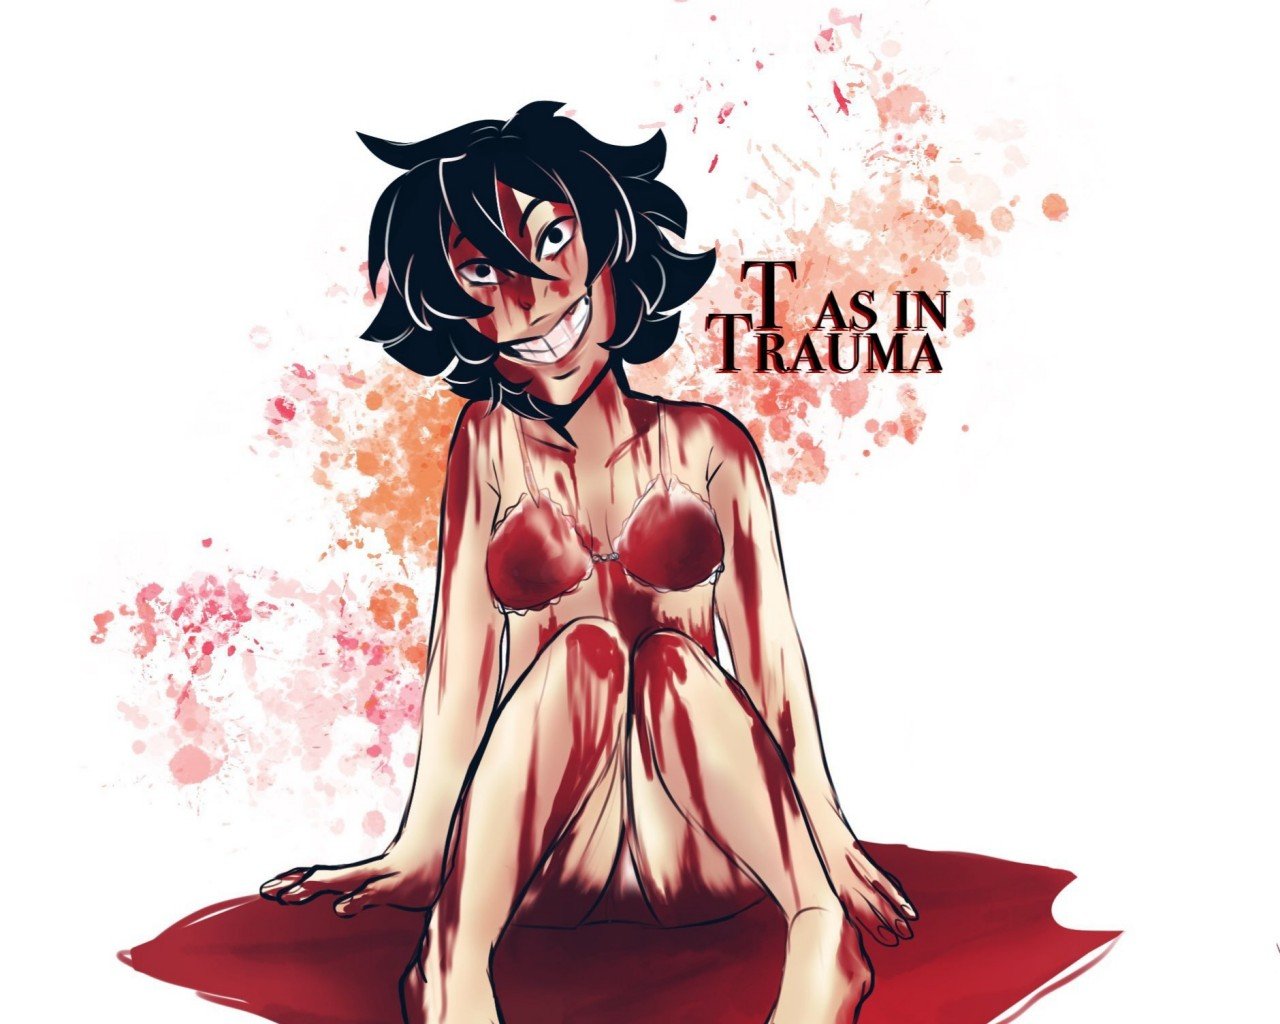 Poster Image for T as in Trauma